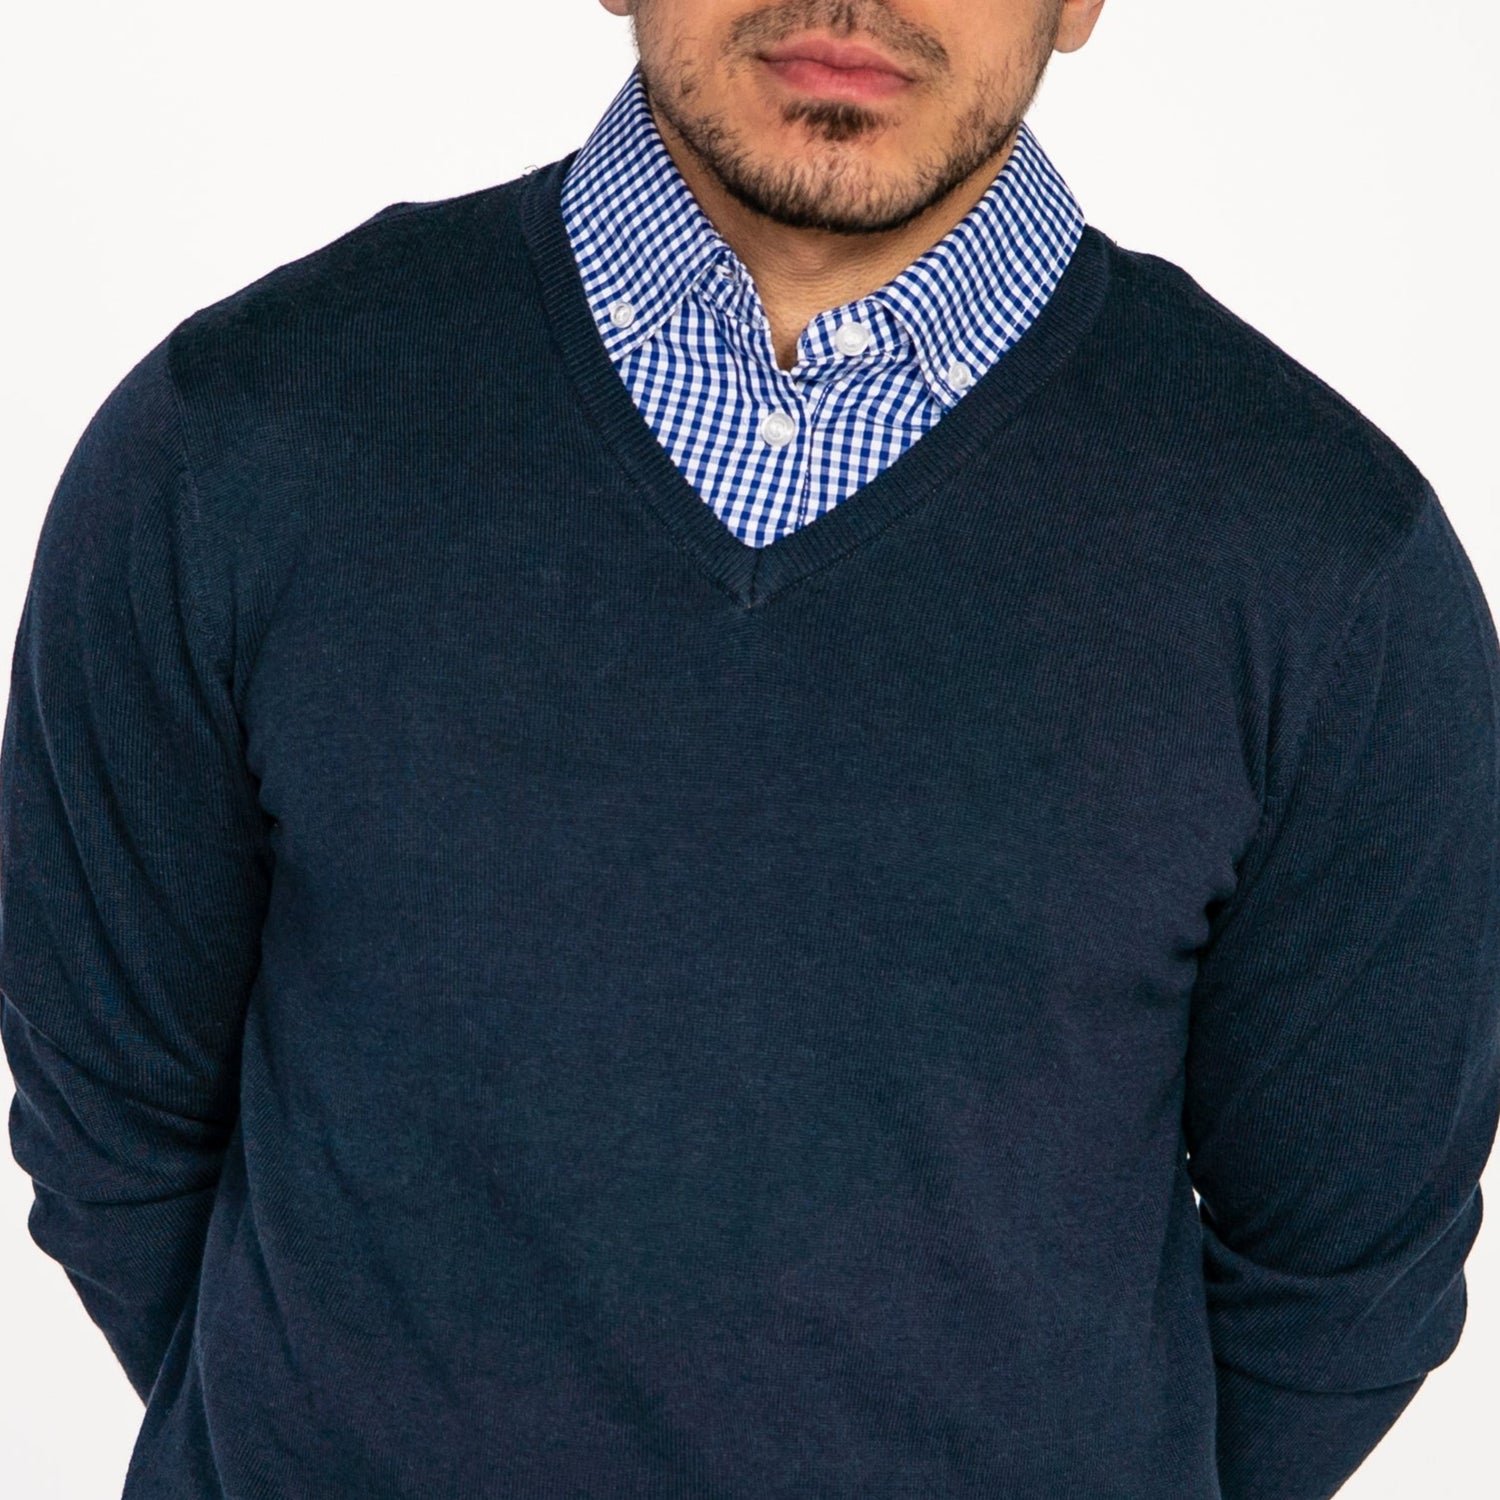 Navy Blue Sweater with Blue Gingham Collared Shirt